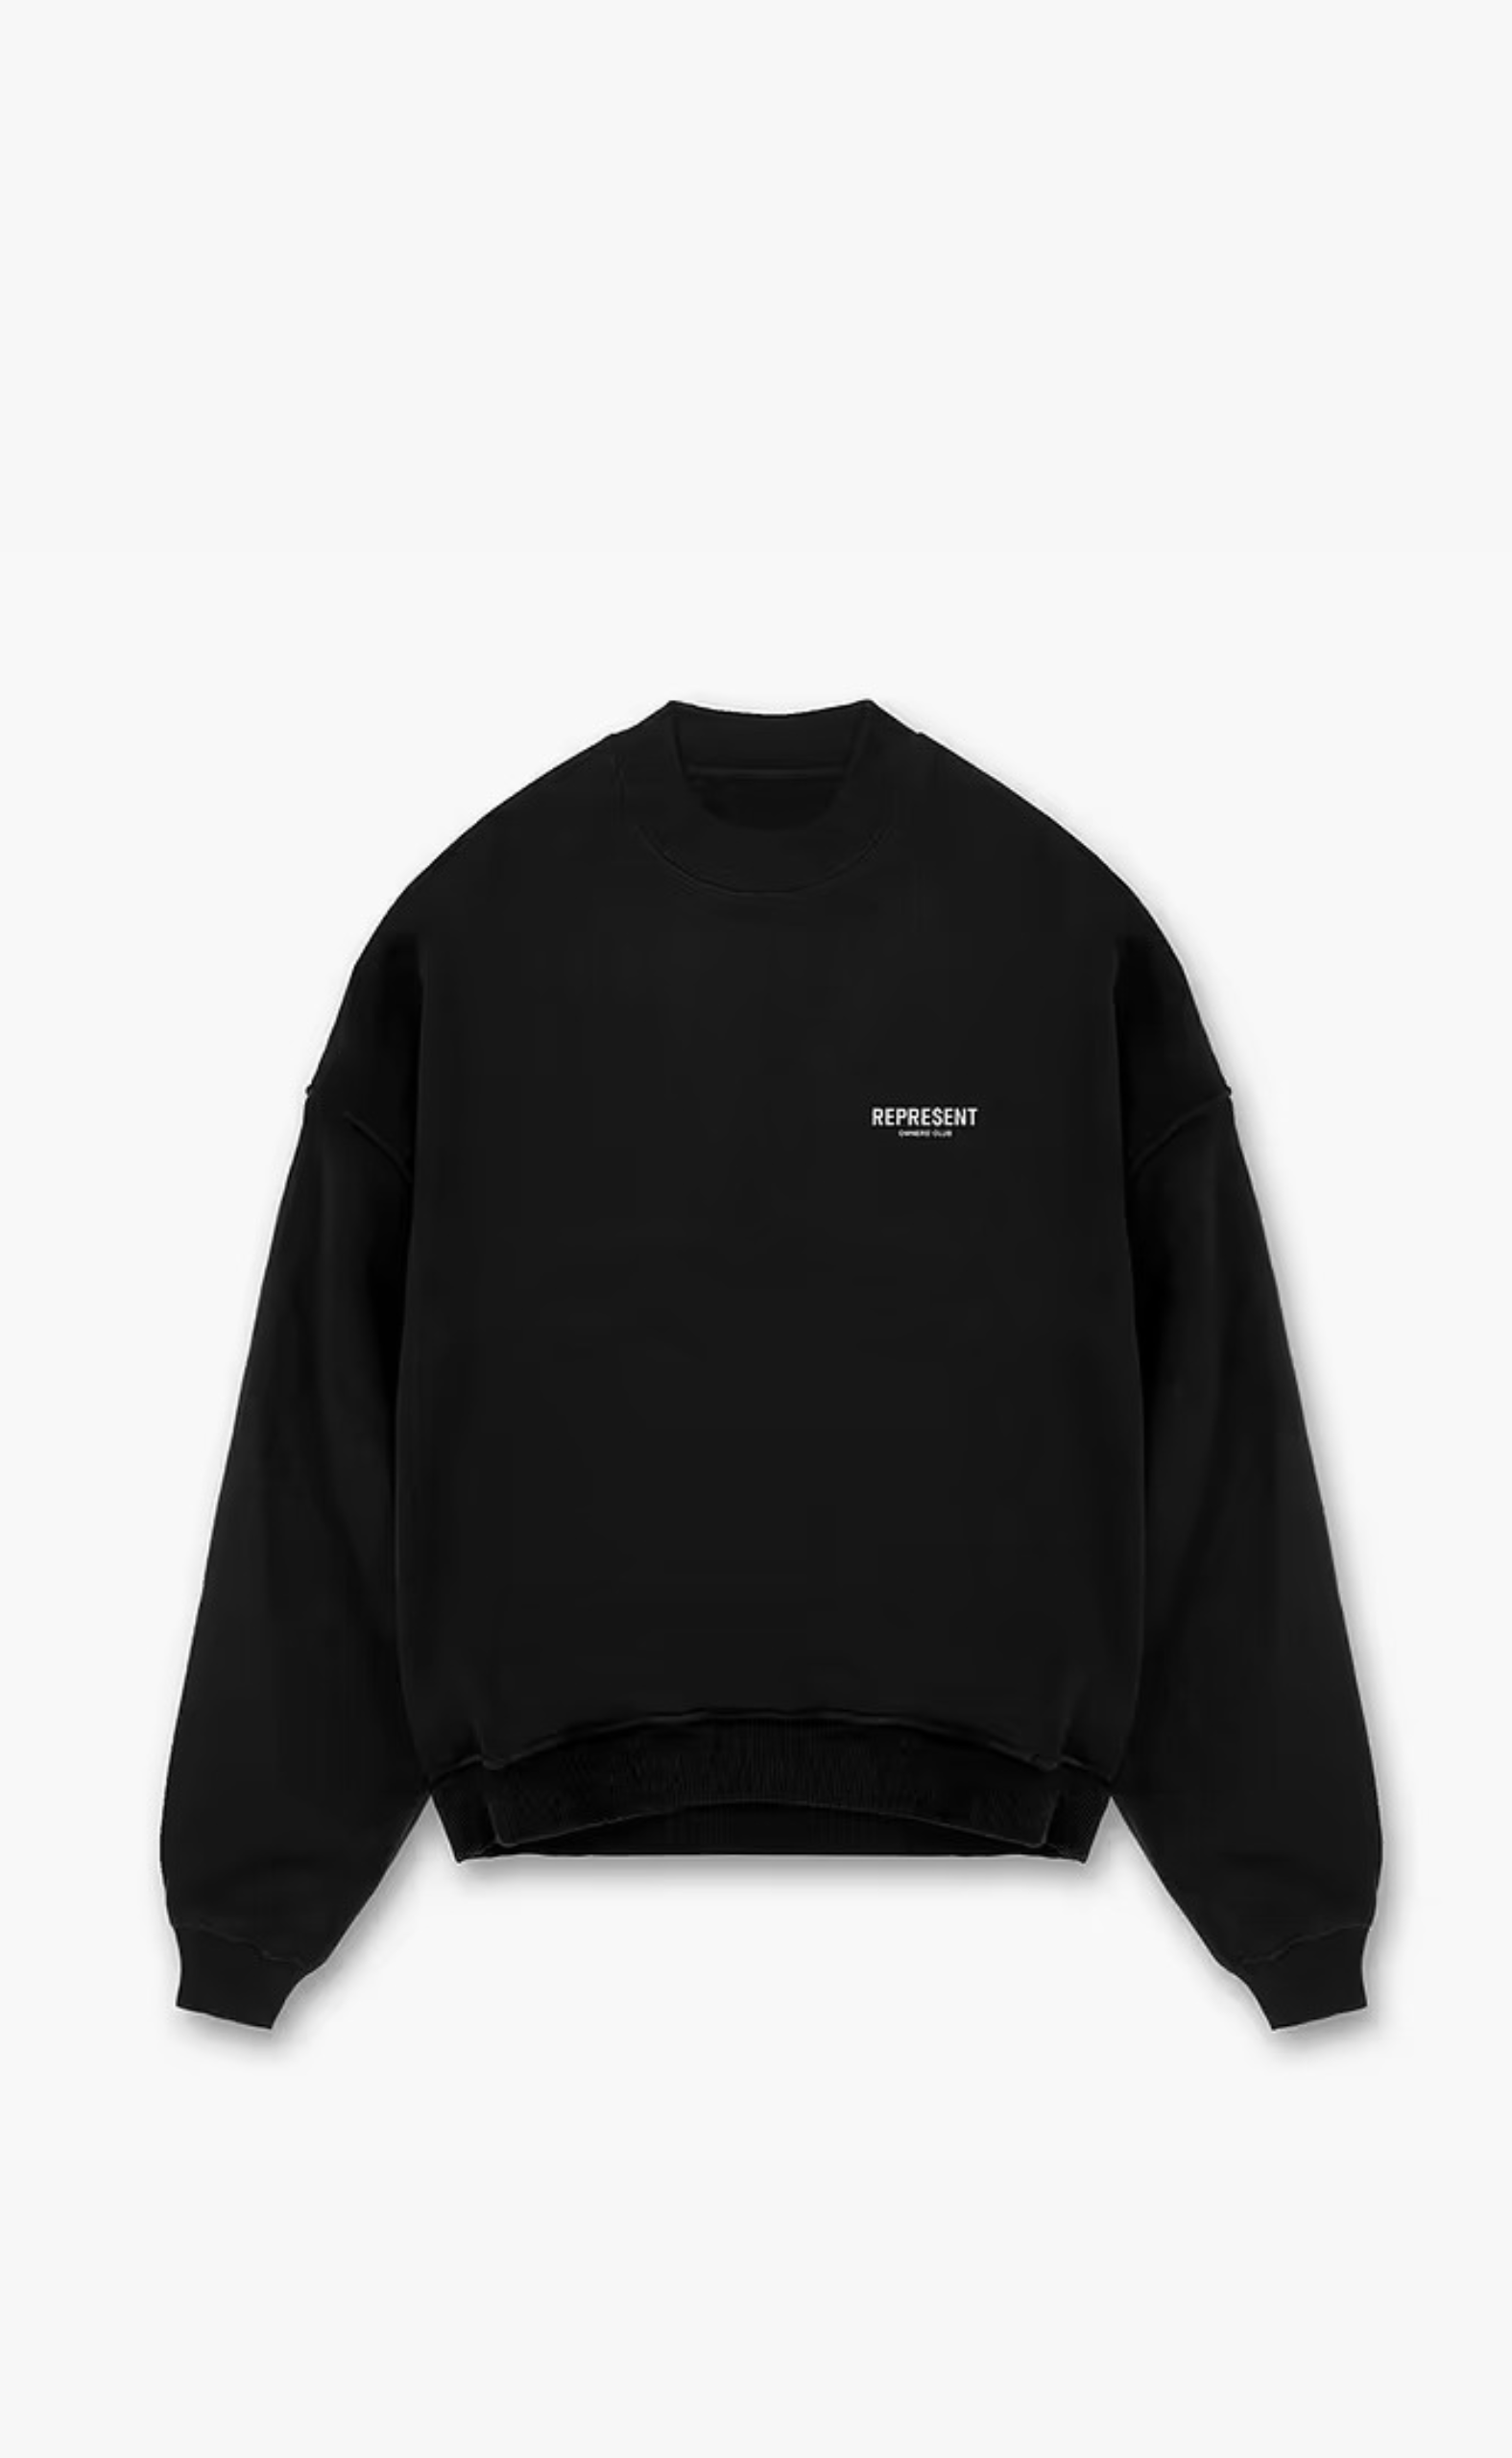 REPRESENT OWNERS CLUB BLACK SWEATER